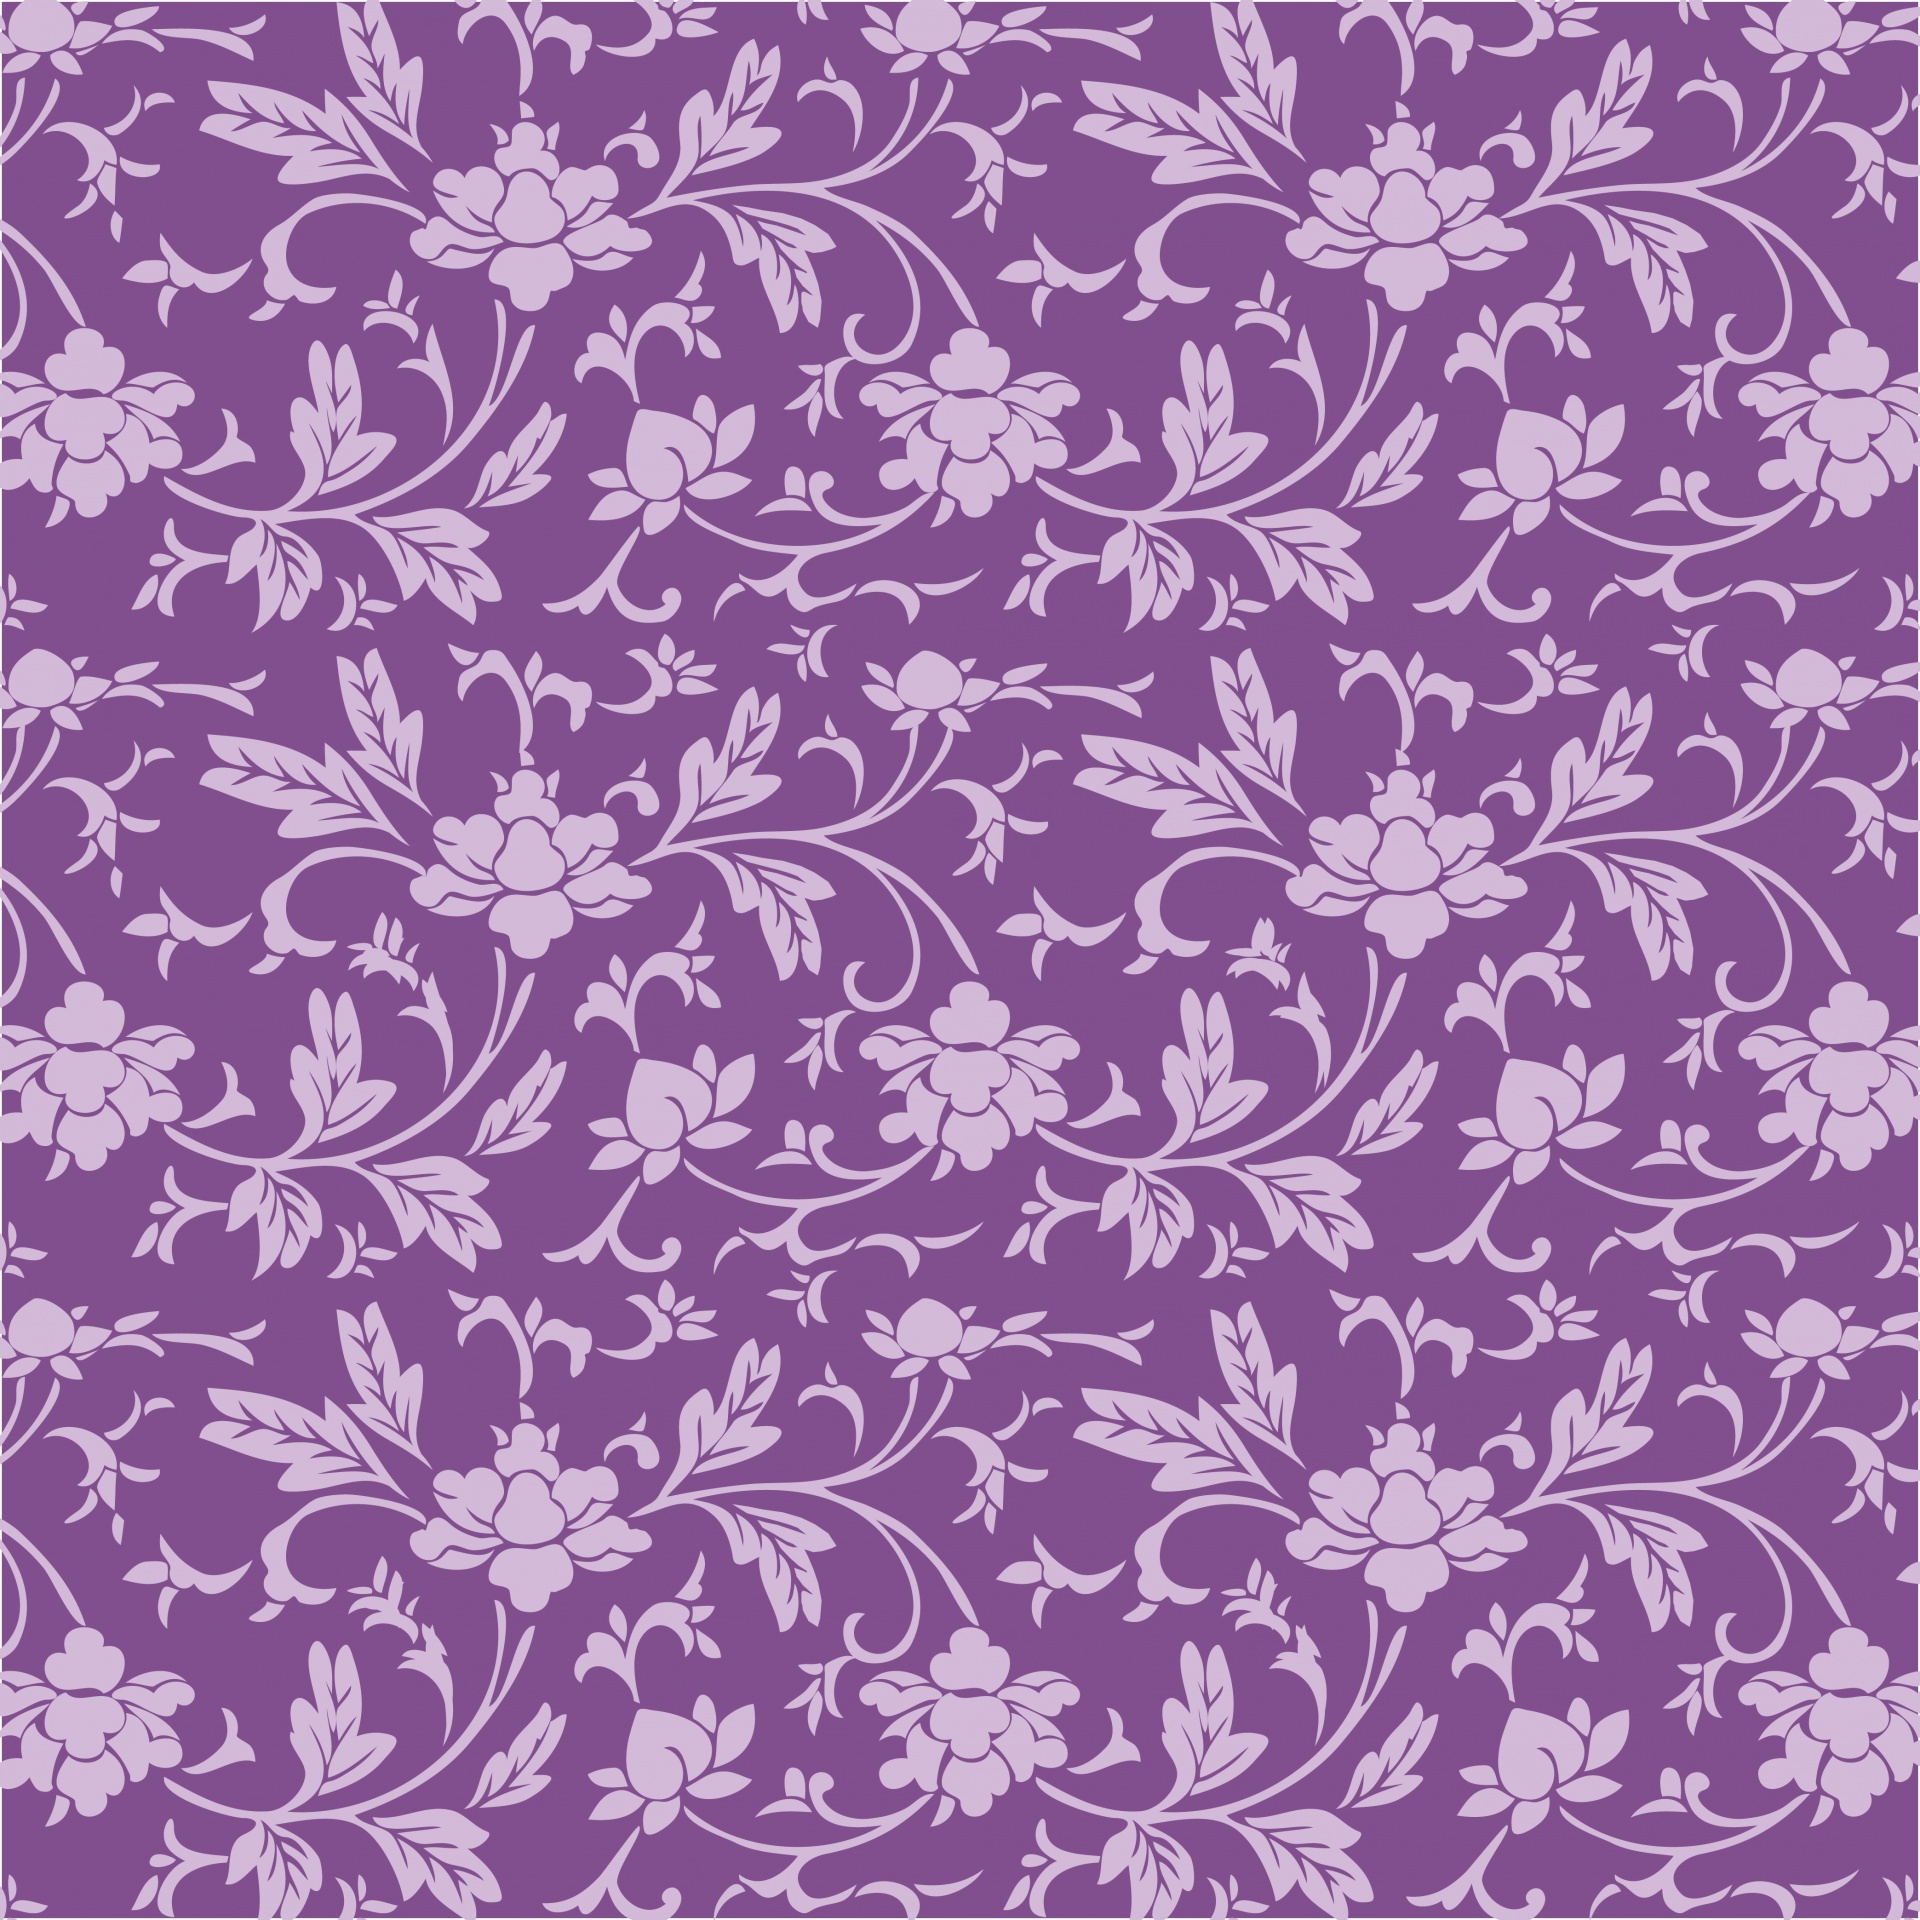 Floral Flowers Wallpaper Free Photo - Fundo Floral Roxo - HD Wallpaper 